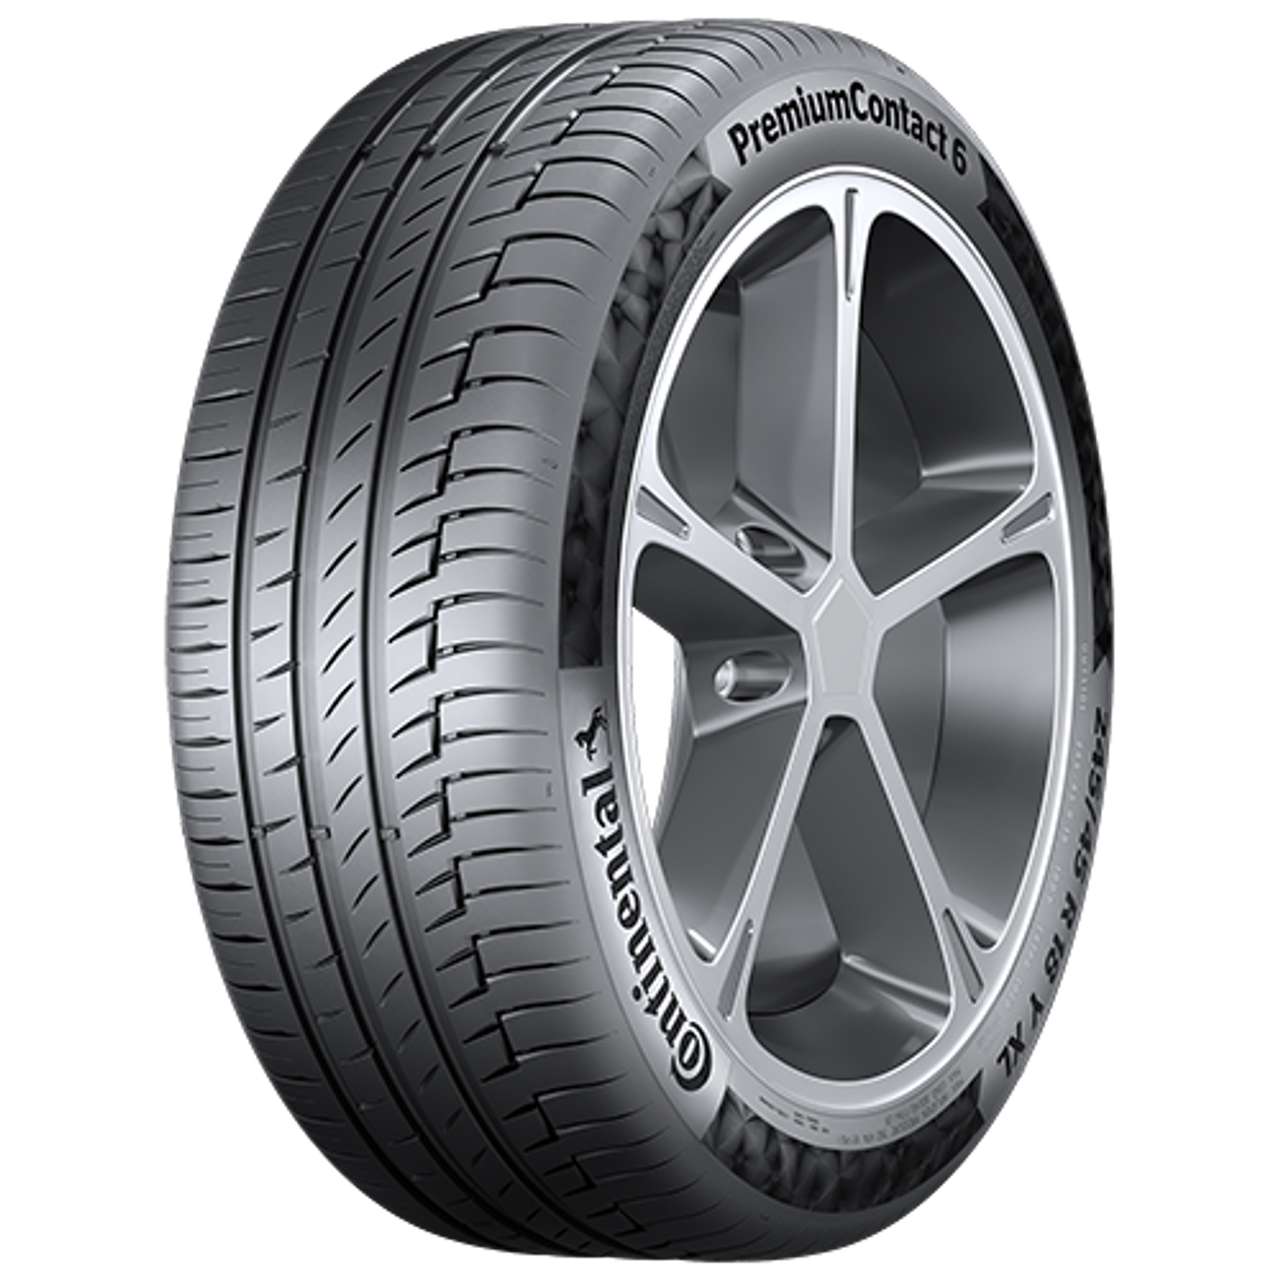 CONTINENTAL PREMIUMCONTACT 6 (AO1) (EVc) 265/45R21 108H FR BSW